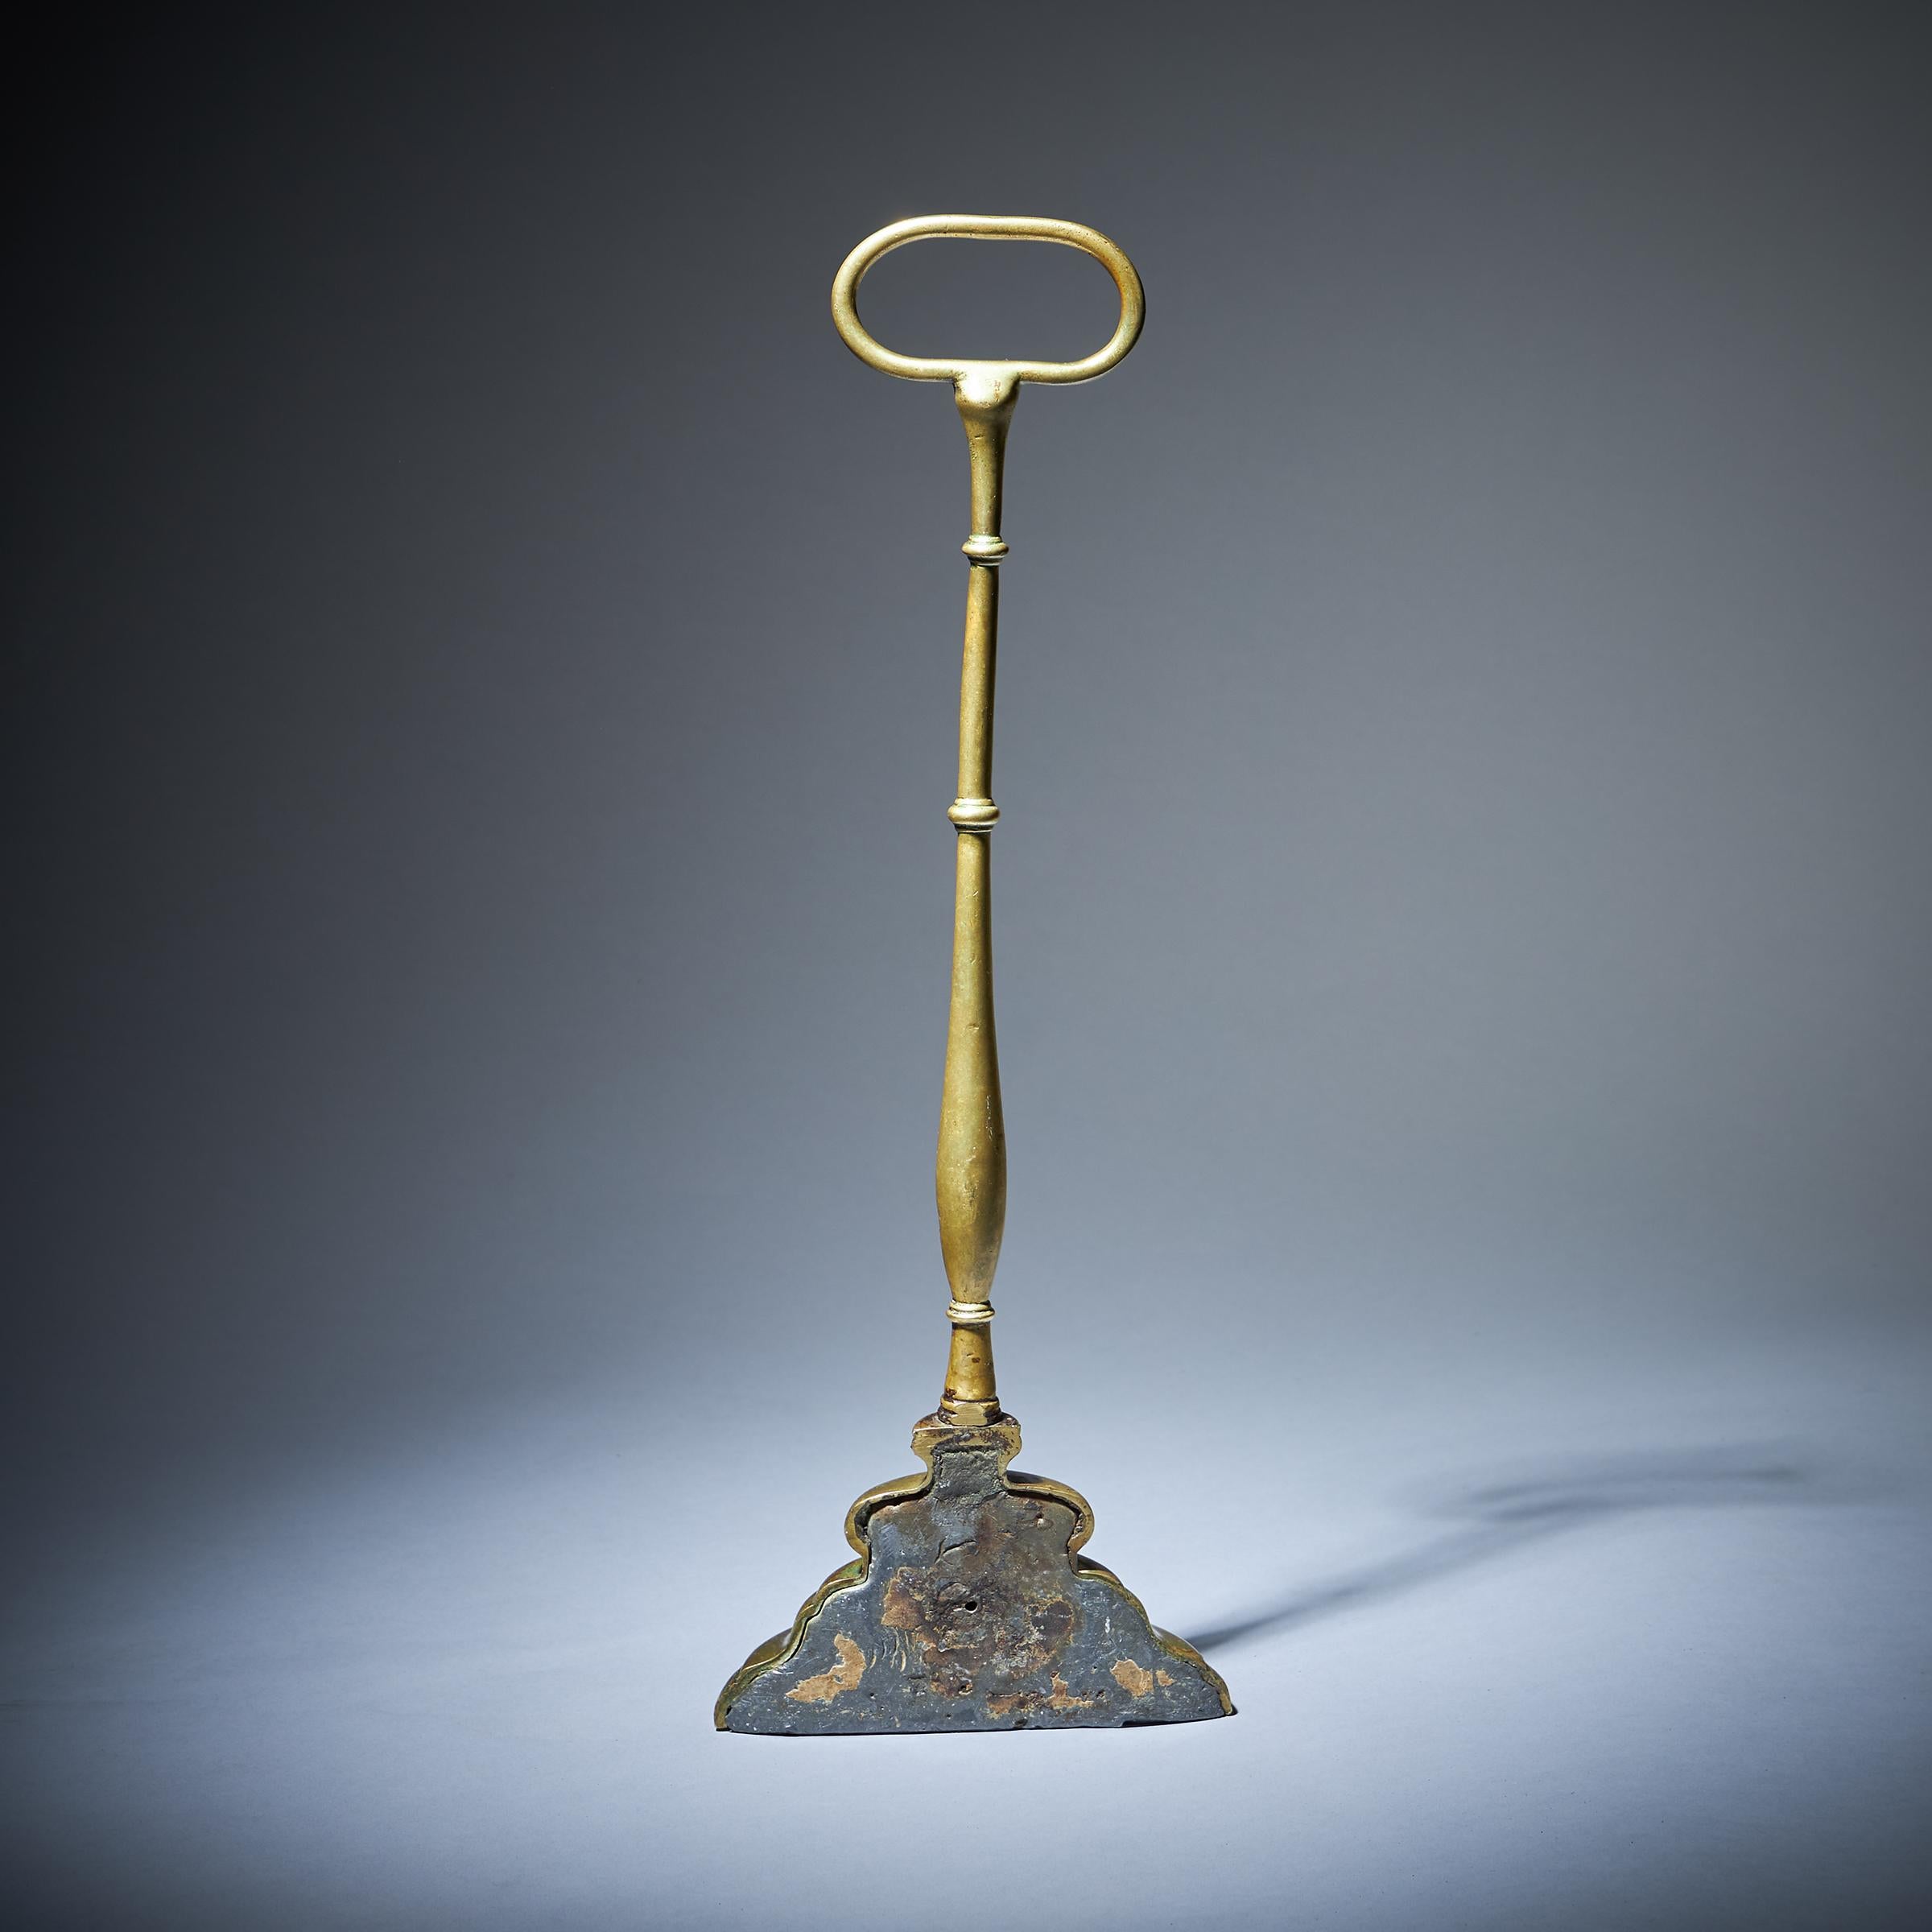 A Rare 18th Century Georgian Brass Doorstop from the Reign of King George III 1